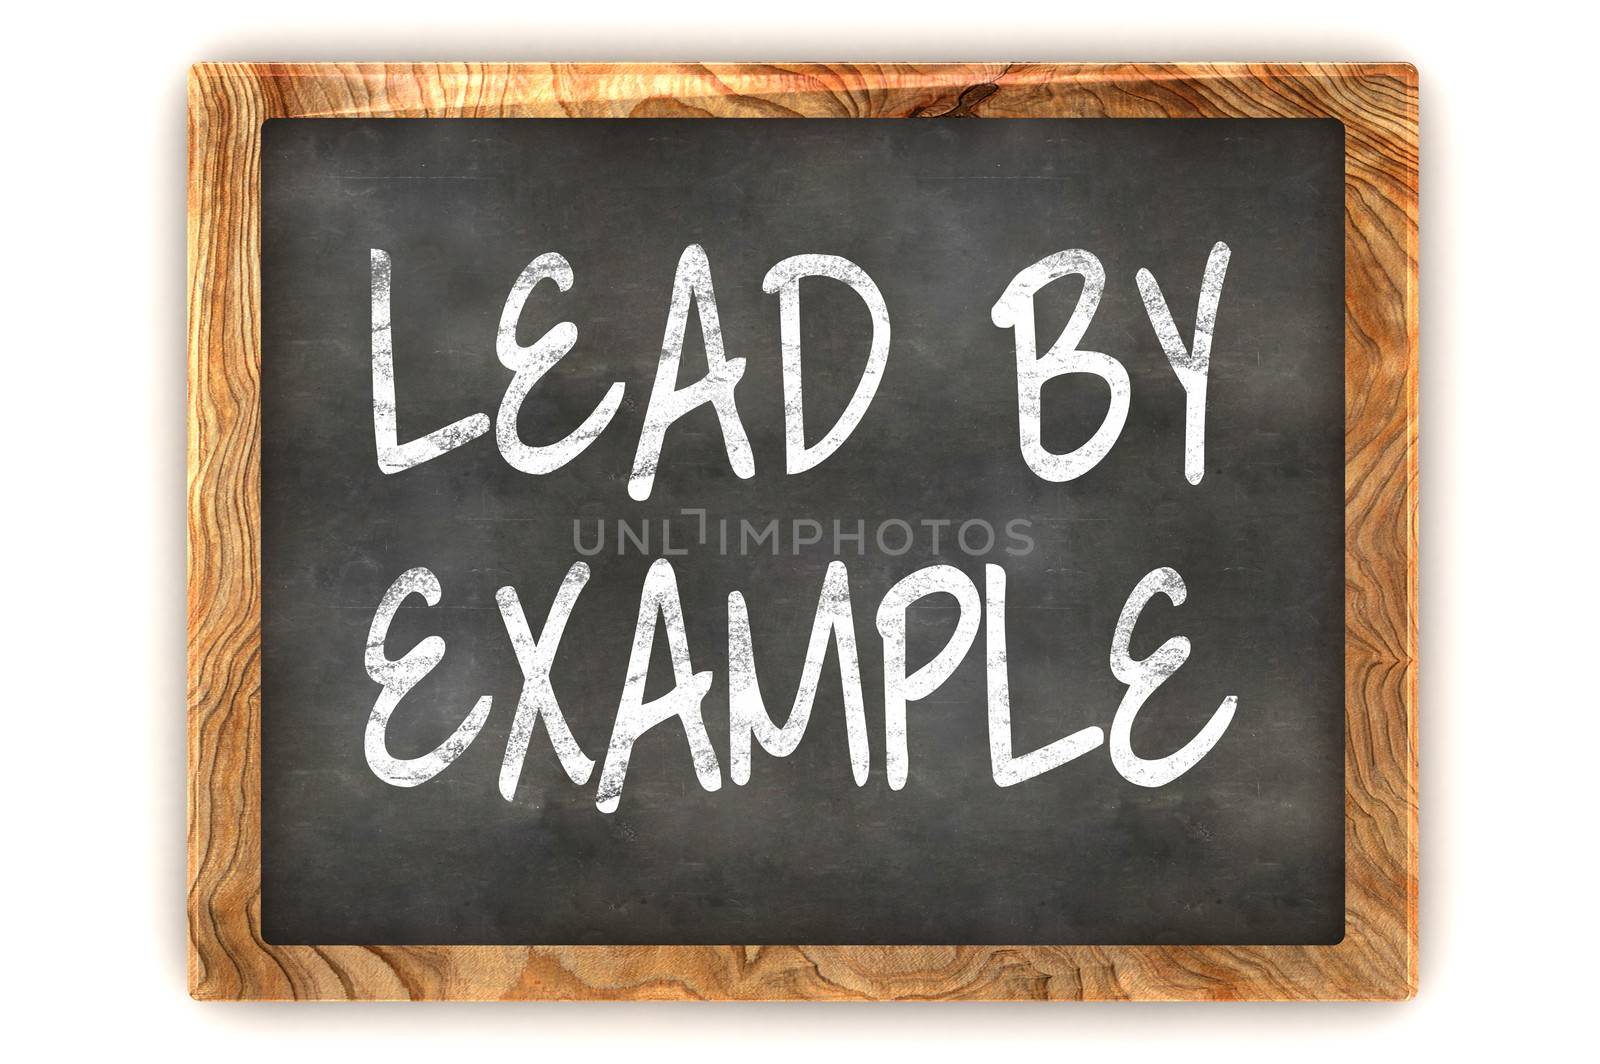 A Colourful 3d Rendered Concept Illustration showing "Lead By Example" writen on a Blackboard with white chalk